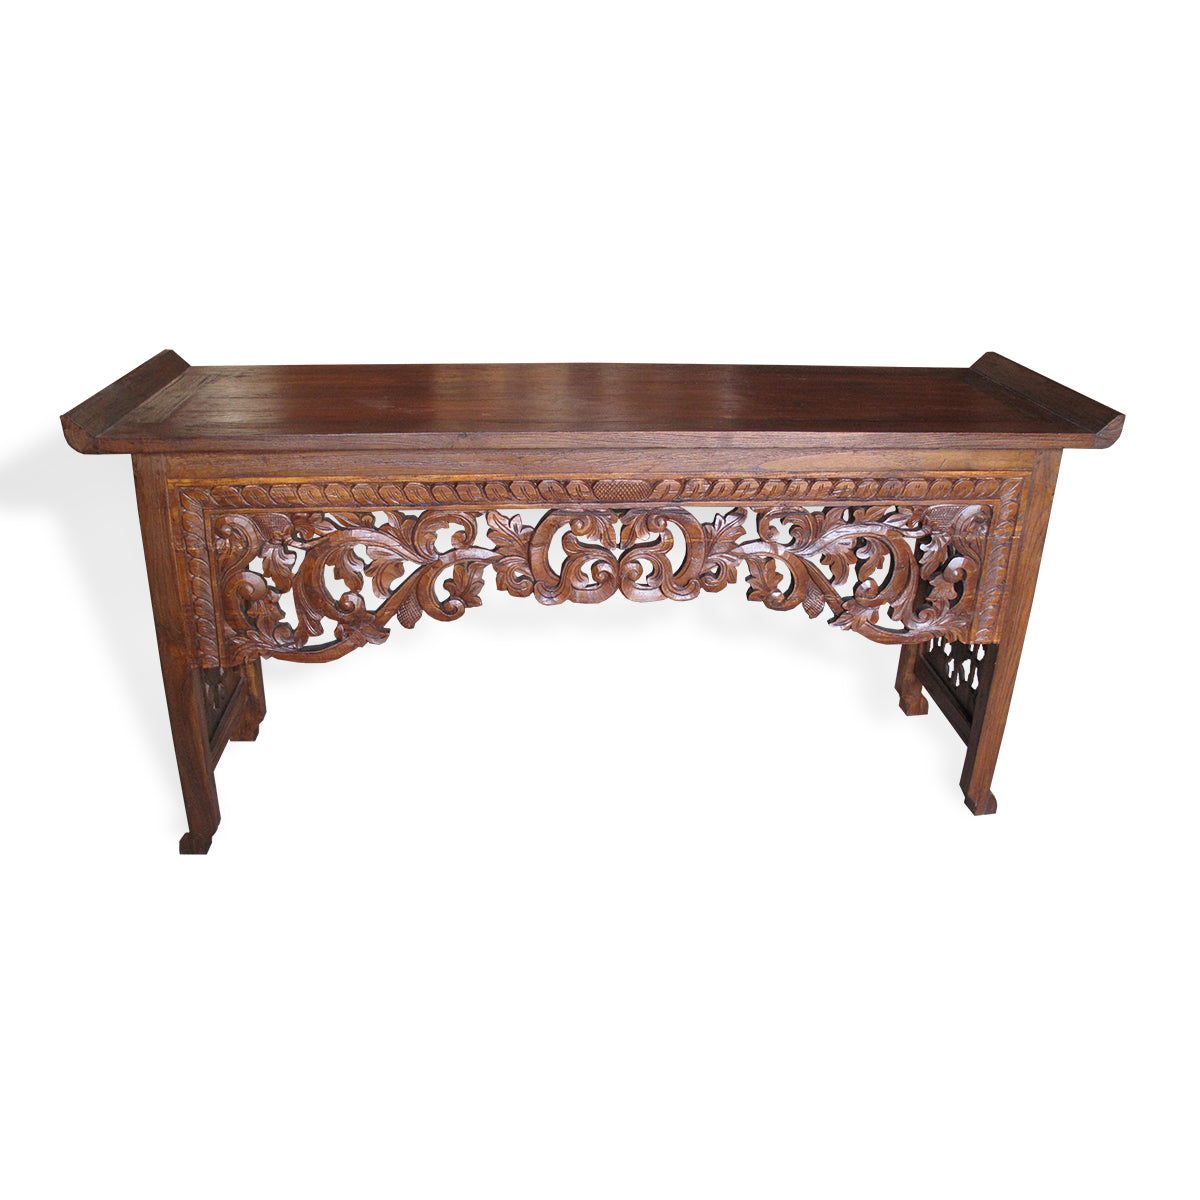 LAC046-1 MEDIUM BROWN RECYCLED TEAK WOOD FULL CARVED CONSOLE TABLE